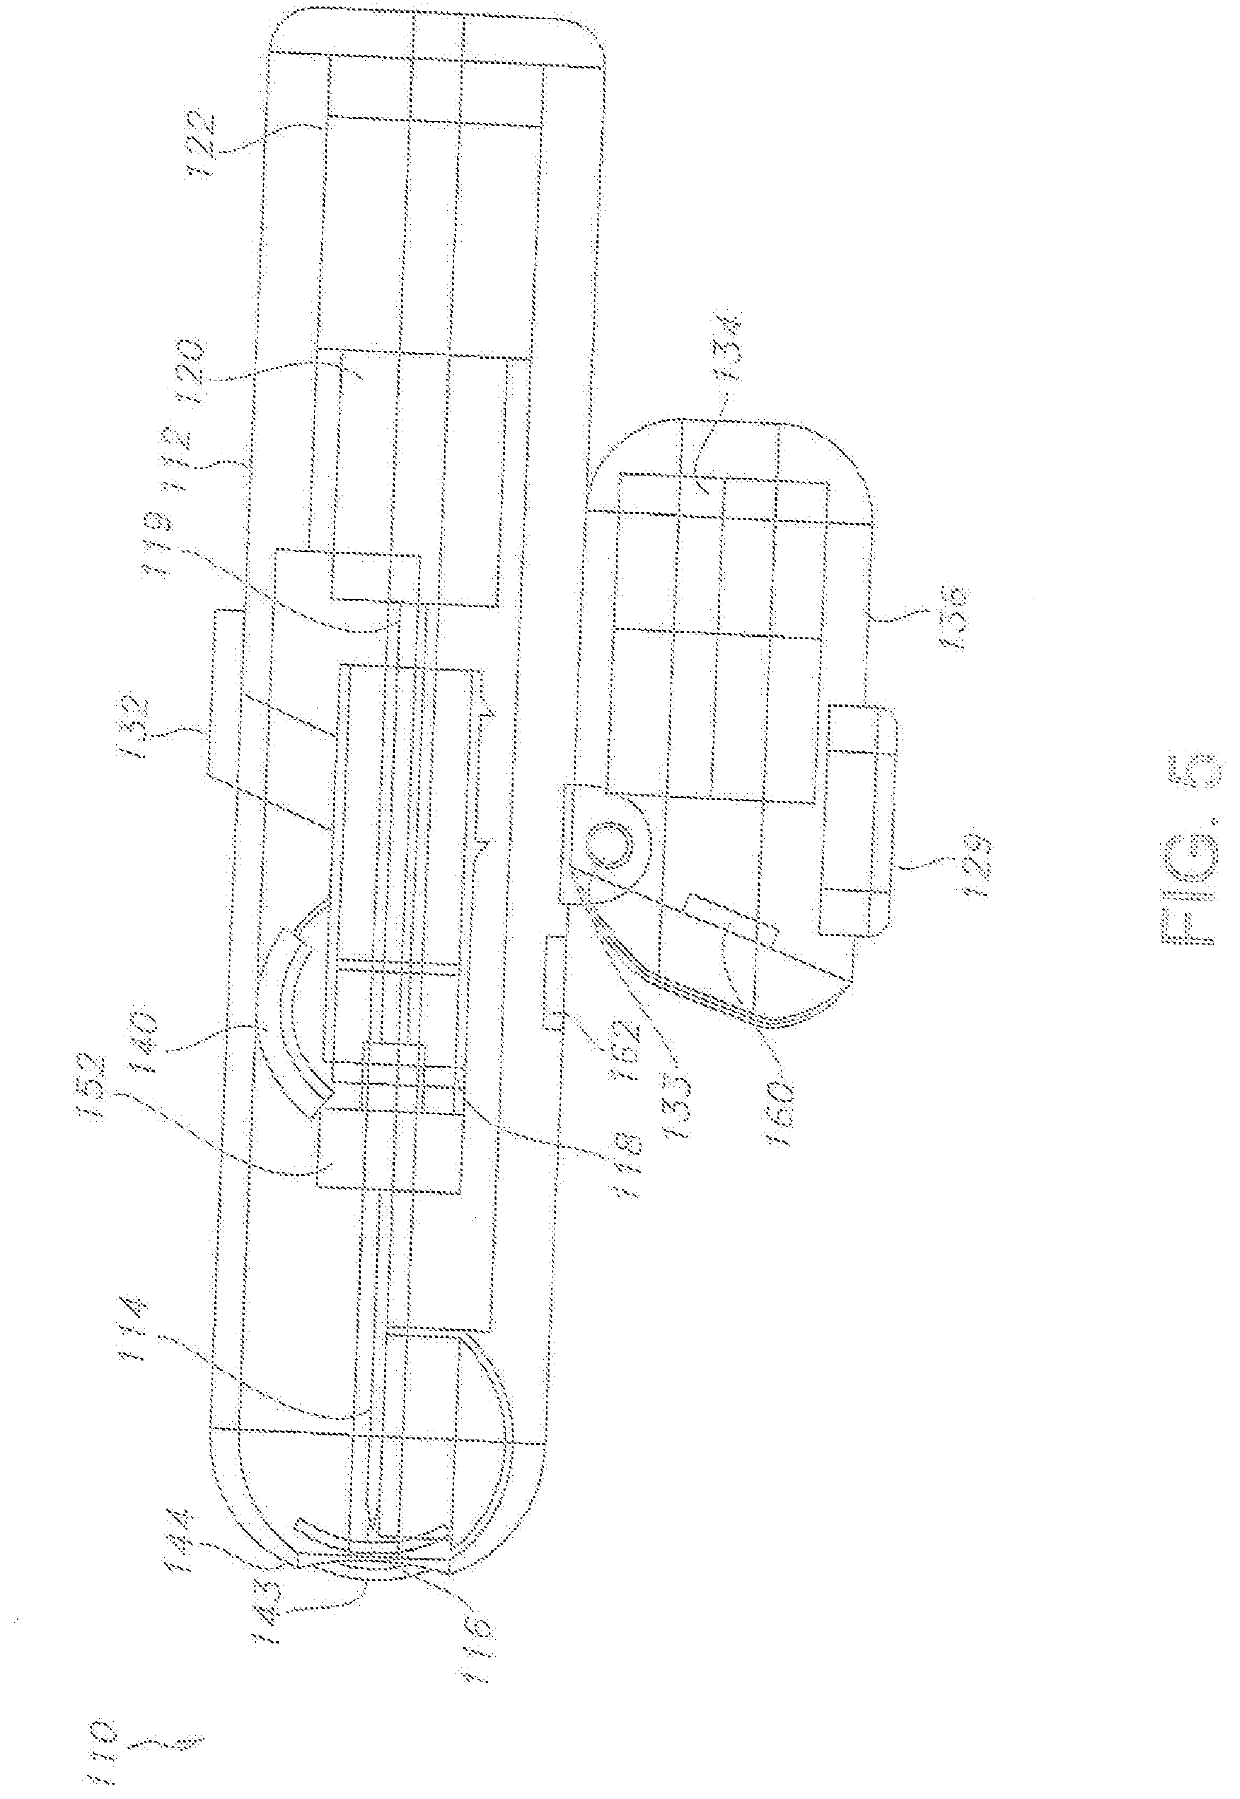 Intraosseous drilling device with barrel having internal stylet/motor housing with barrel opening extender